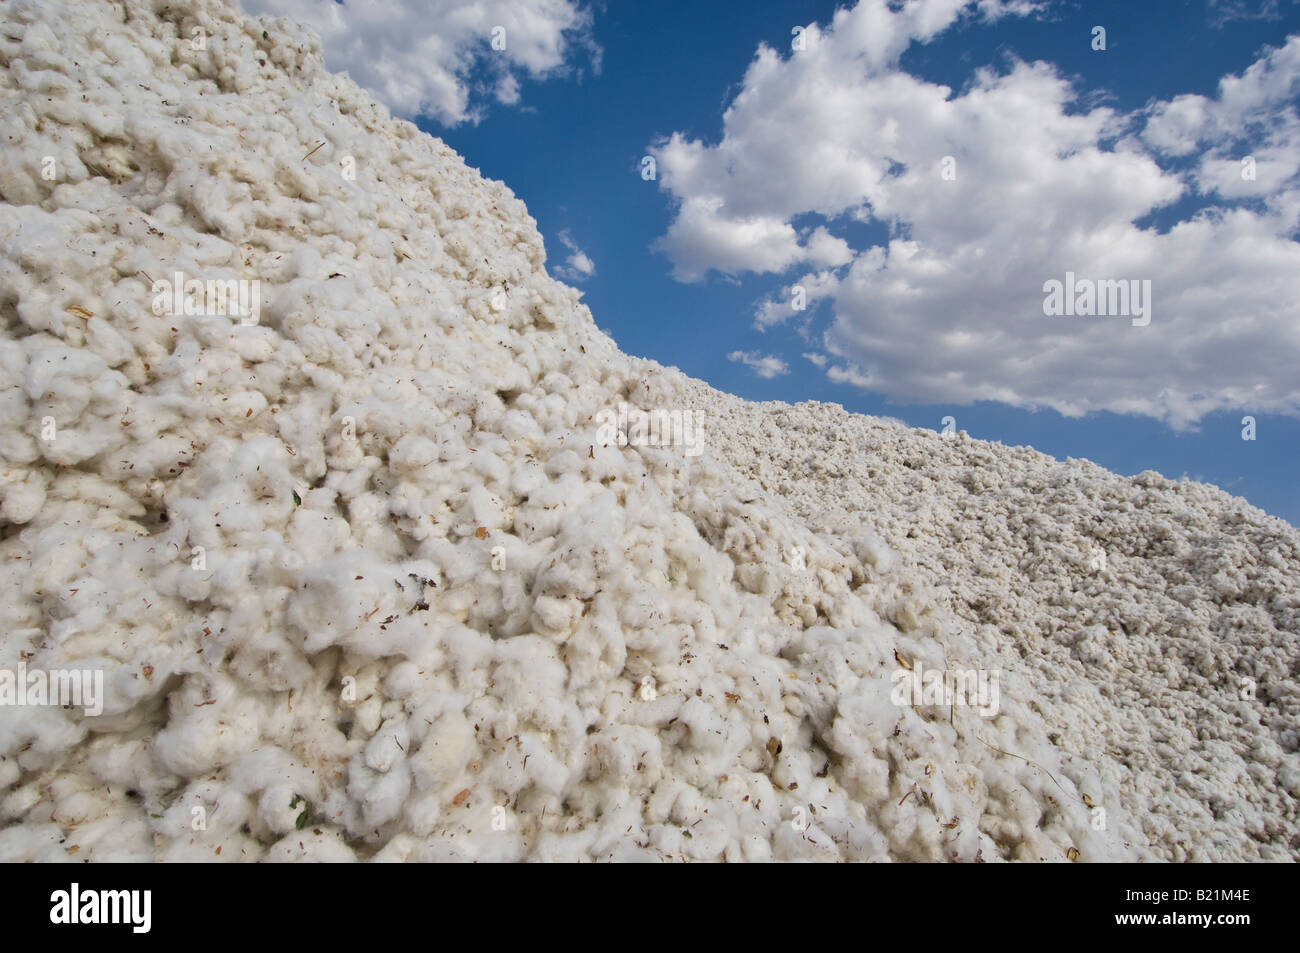 Cotton being prepared to be commercialized, Ethiopia. Stock Photo